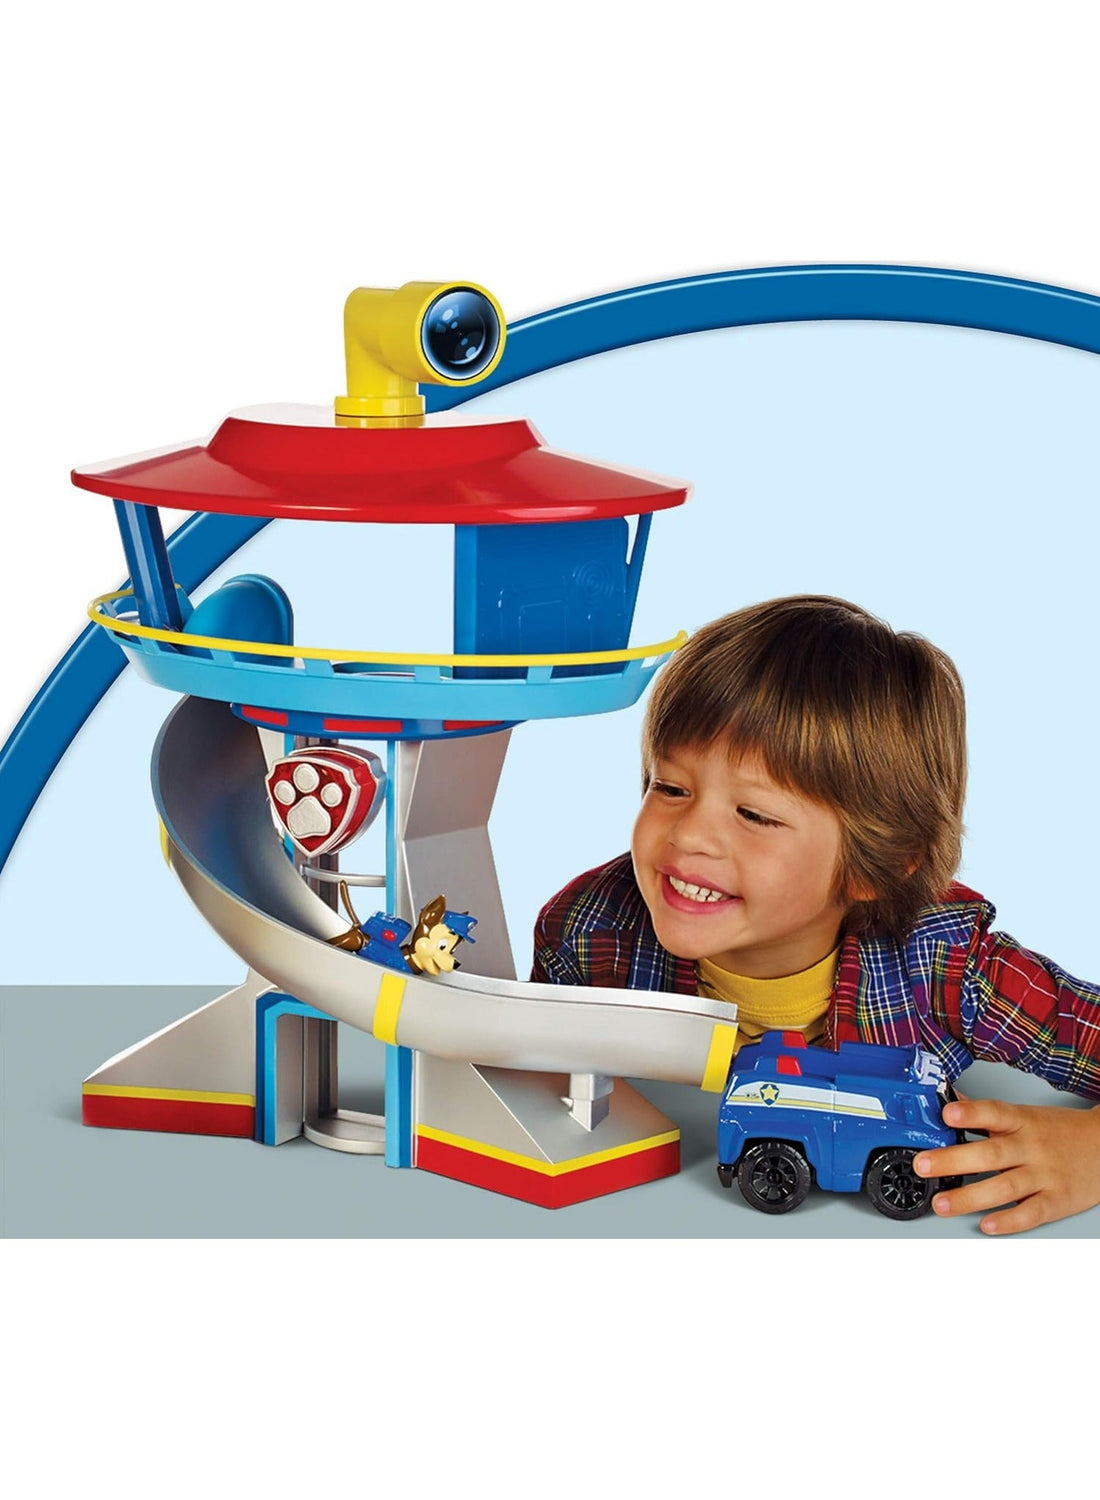 Paw Patrol Lookout Tower Playset Toys for Boys Pre School Action Figures